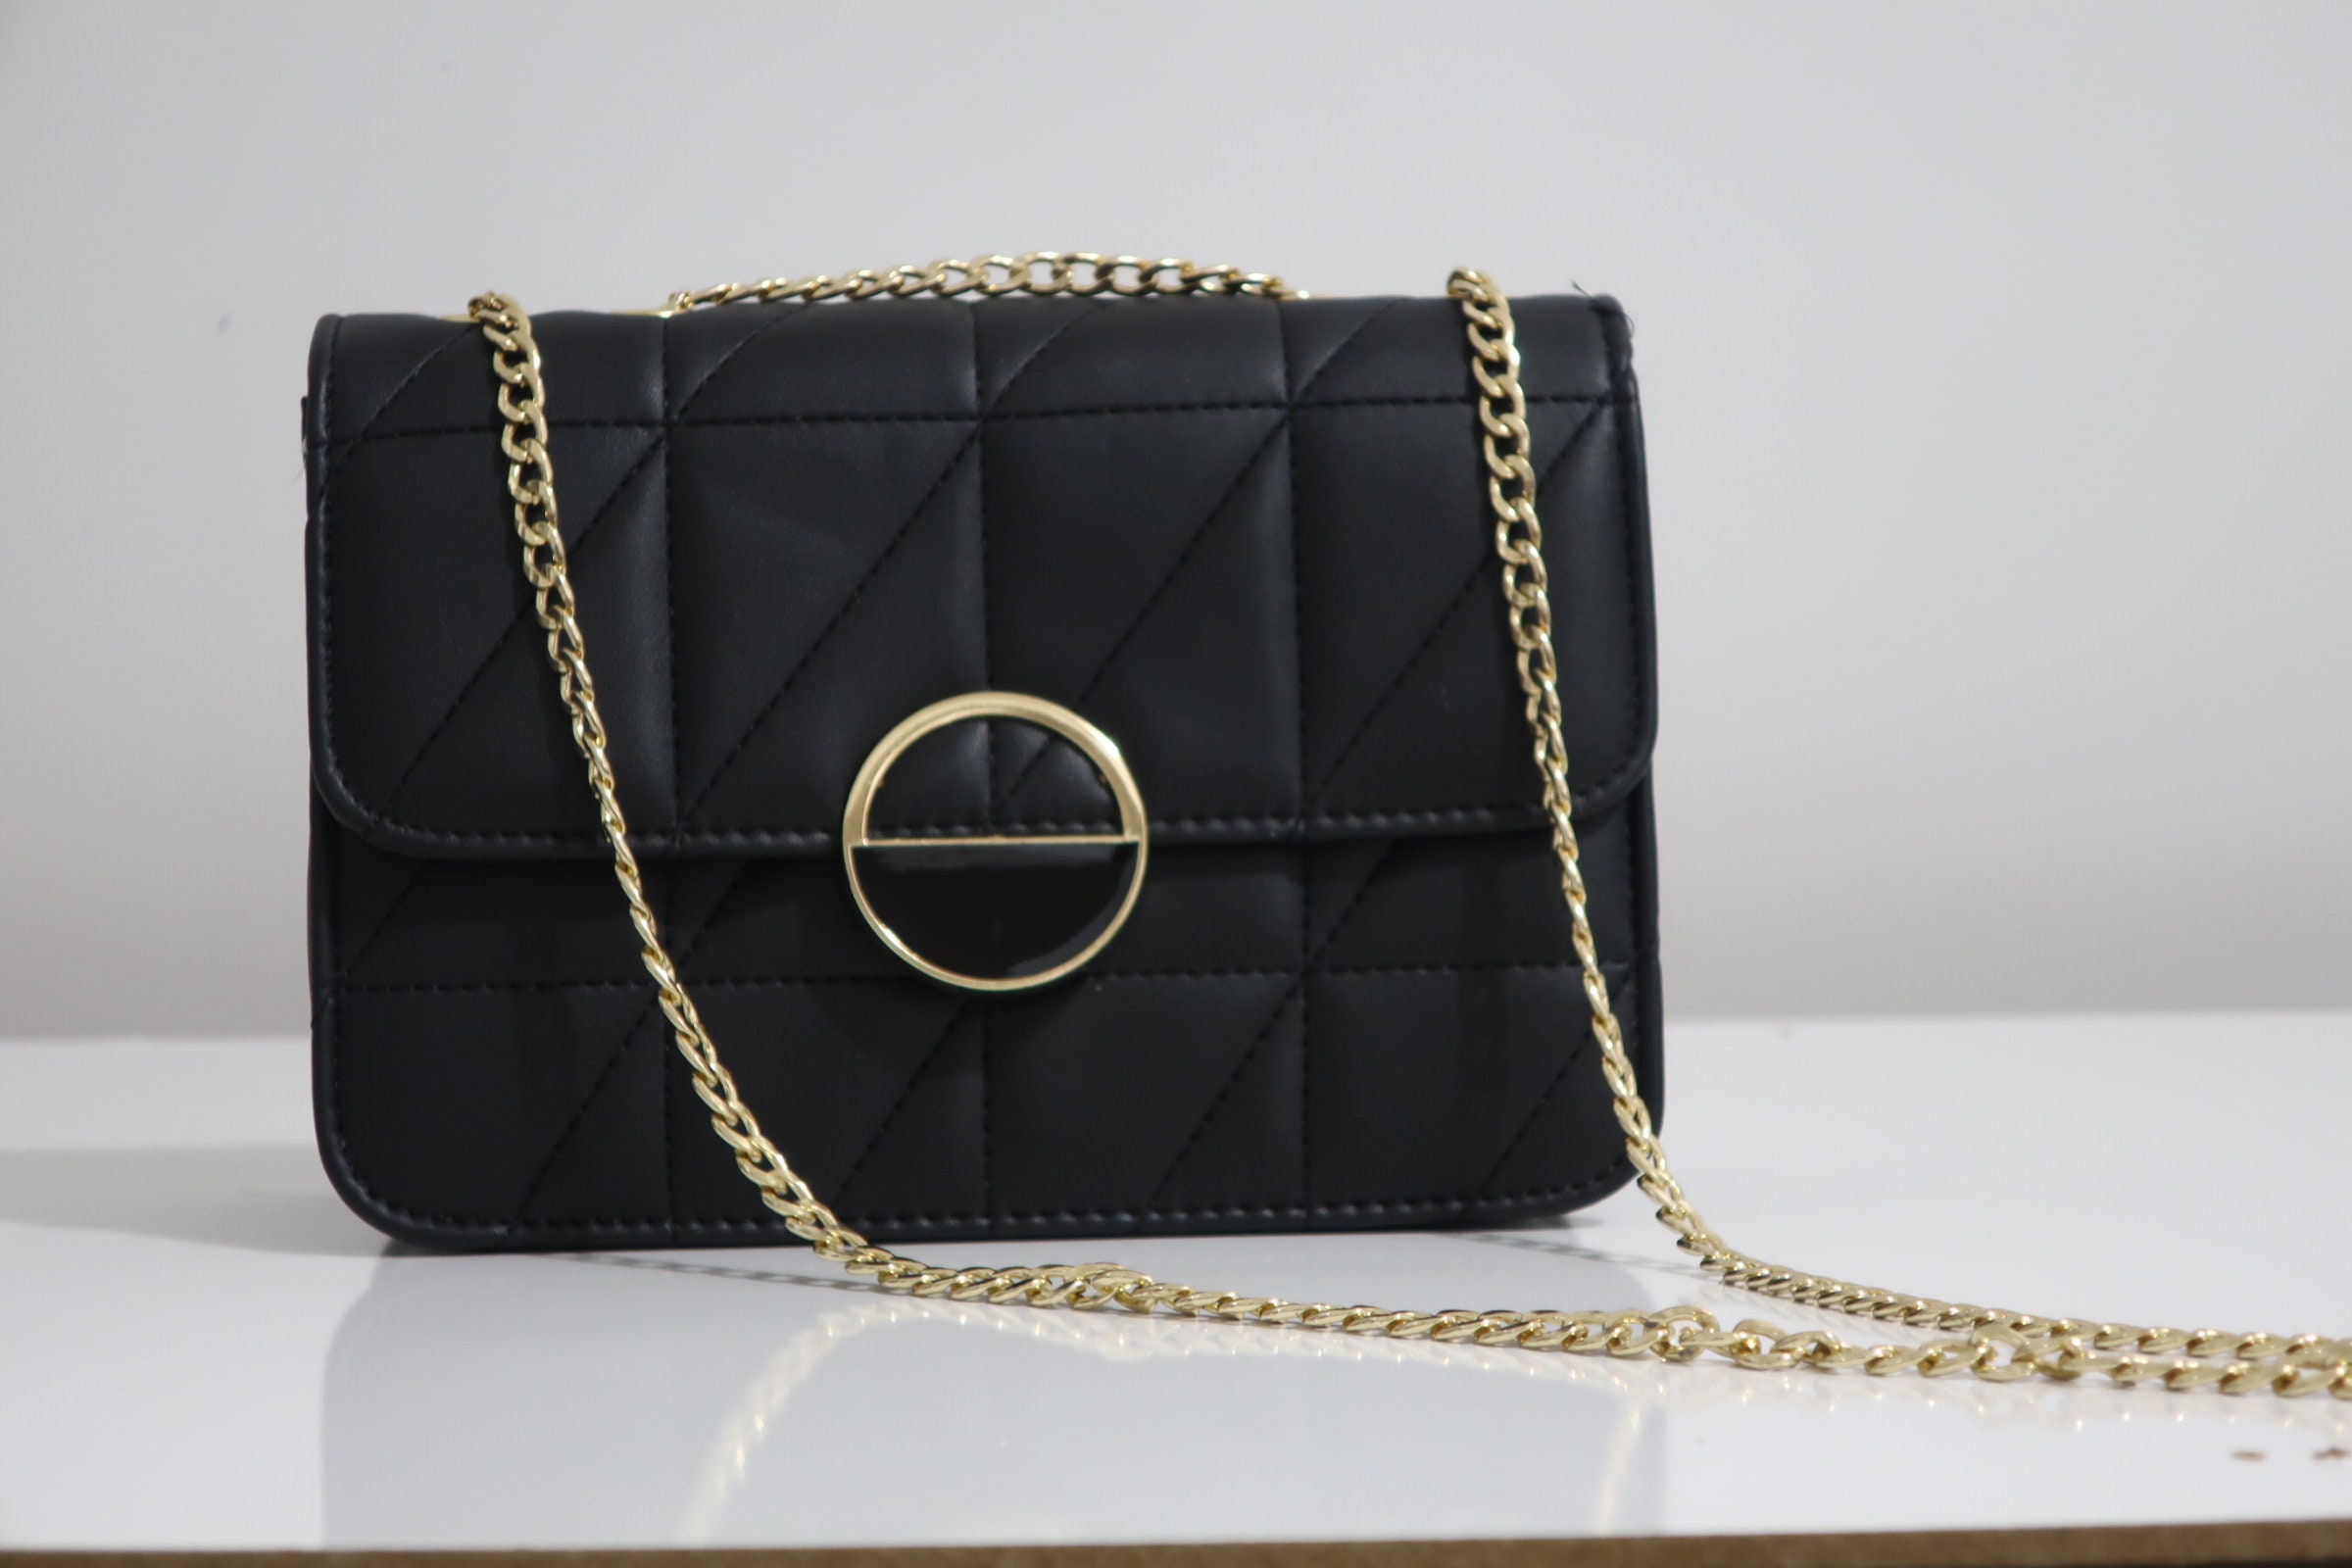 Marmont Genuine Leather Handbag With Gold Chain Fashionable Mini Purse For  Women, Shoulder Black Leather Bag Crossbody And Wallet In 16.5cm, 22cm,  26cm GB85 From Wlls10, $35.65 | DHgate.Com